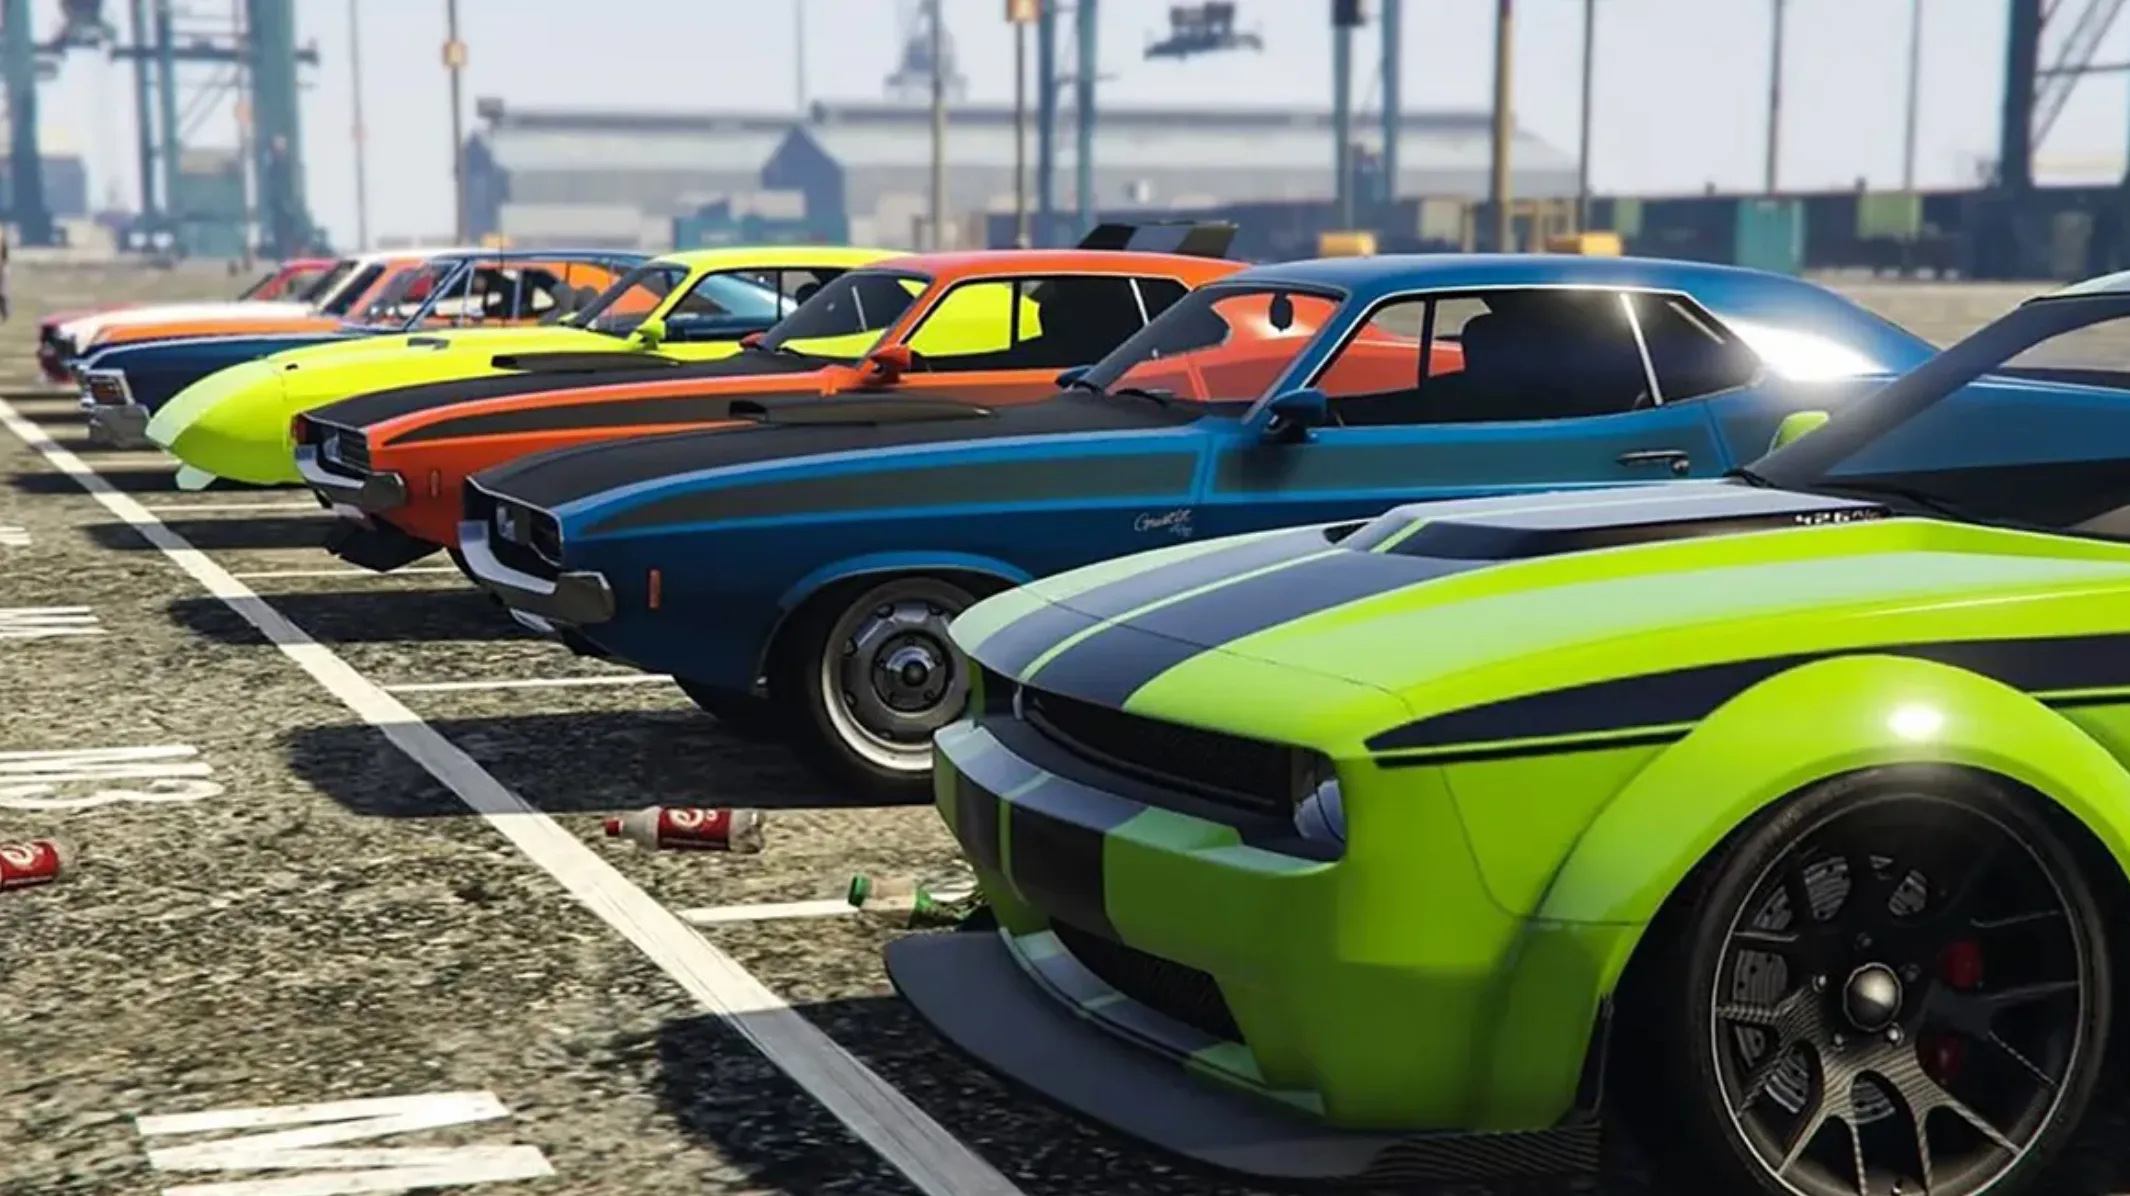 GTA Online new cars added with the Chop Shop update